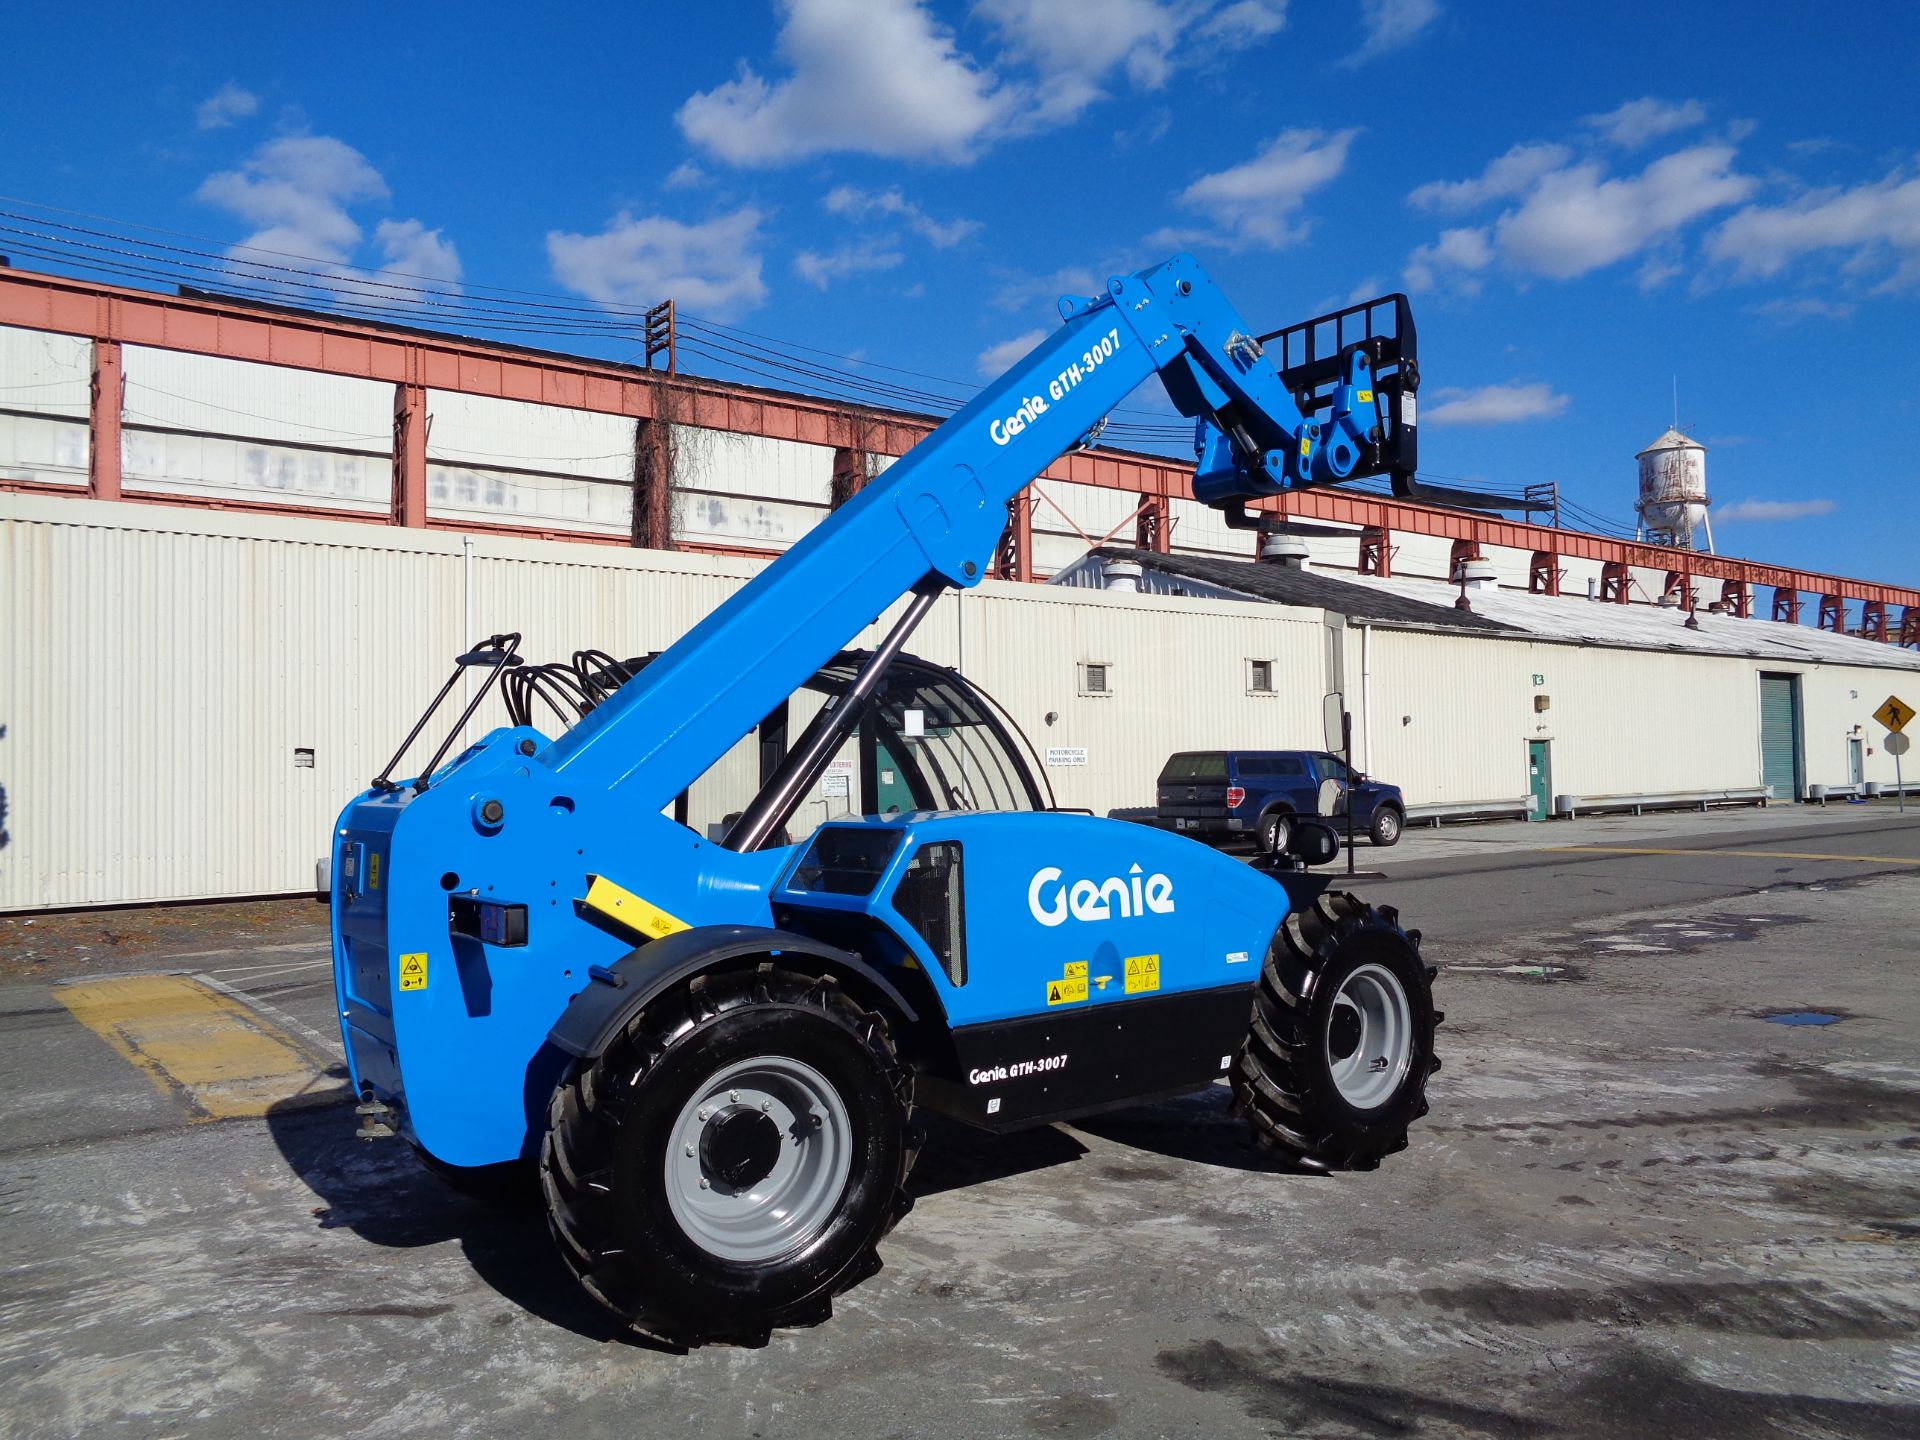 New Unused 2018 Genie GTH3007 Telescopic Forklift 6,600 lbs - Enclosed Cab - Image 3 of 23